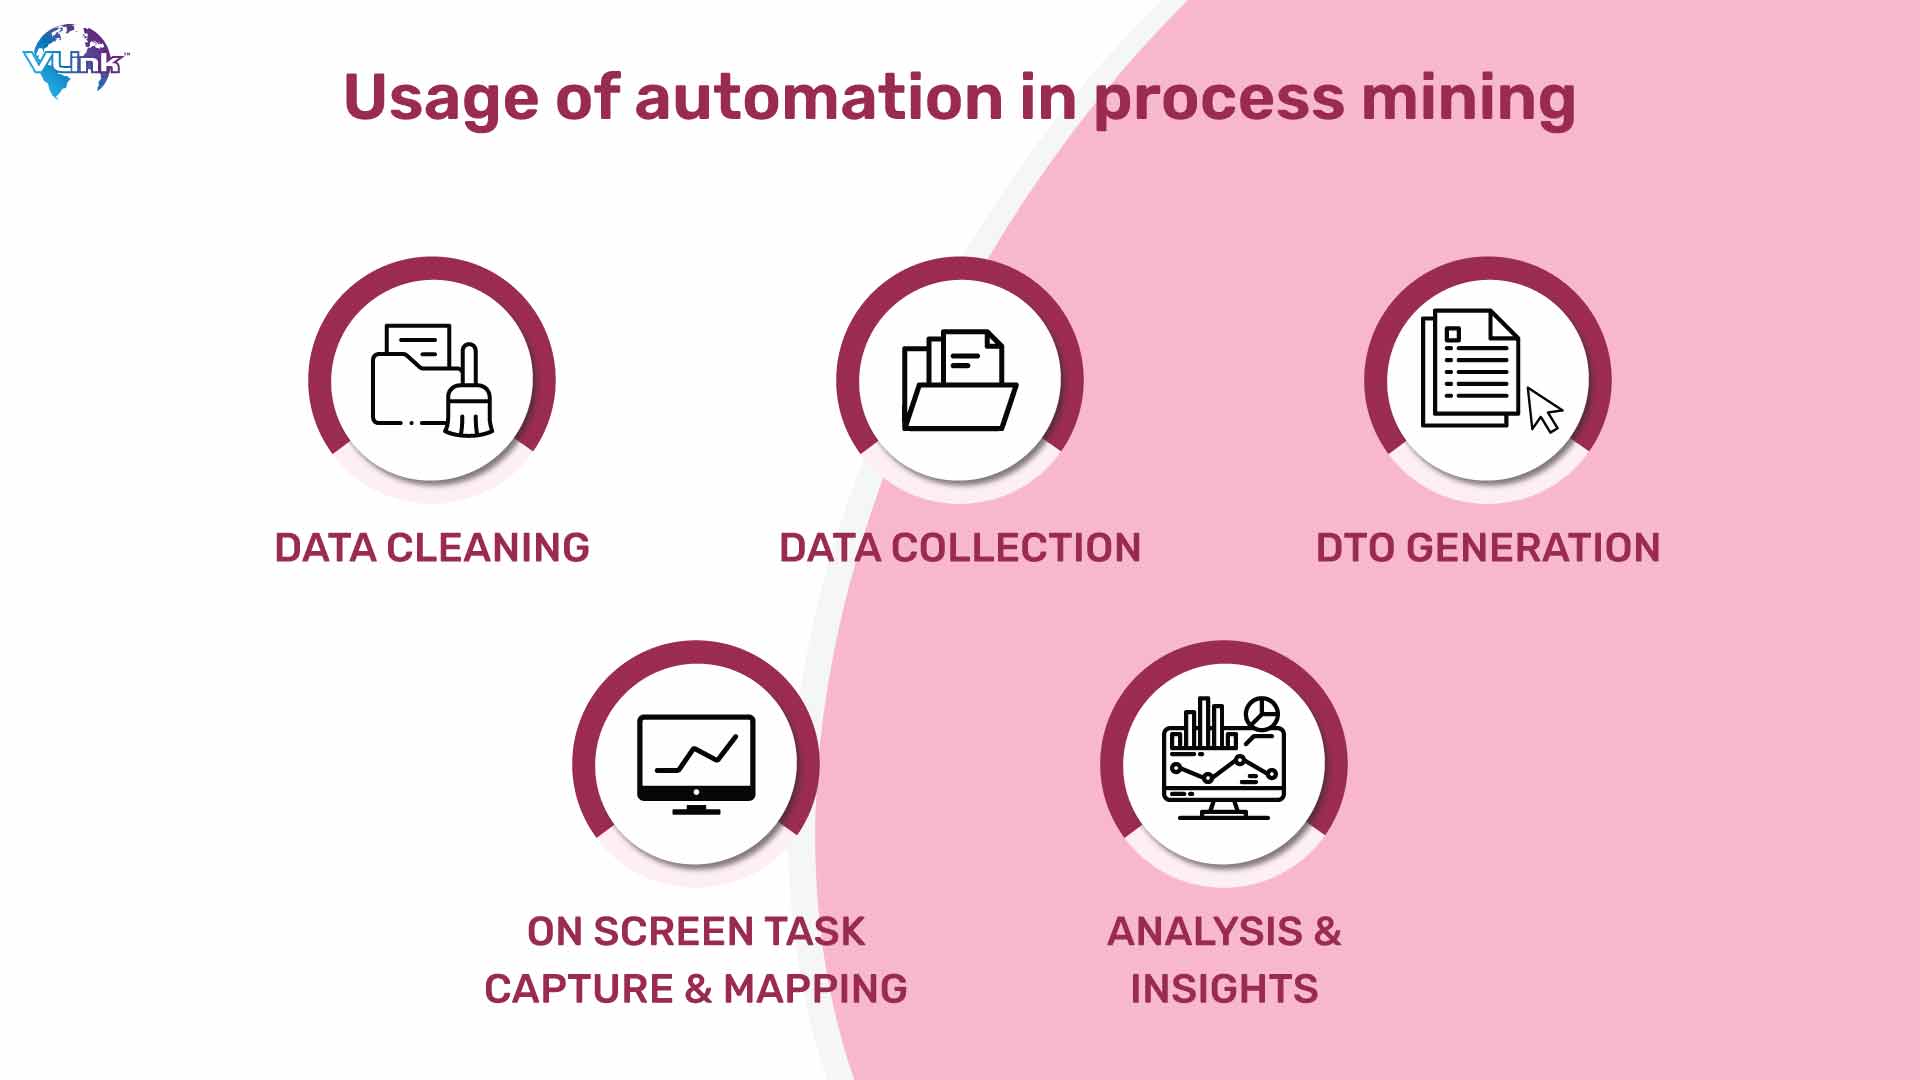 Usage of automation in process mining